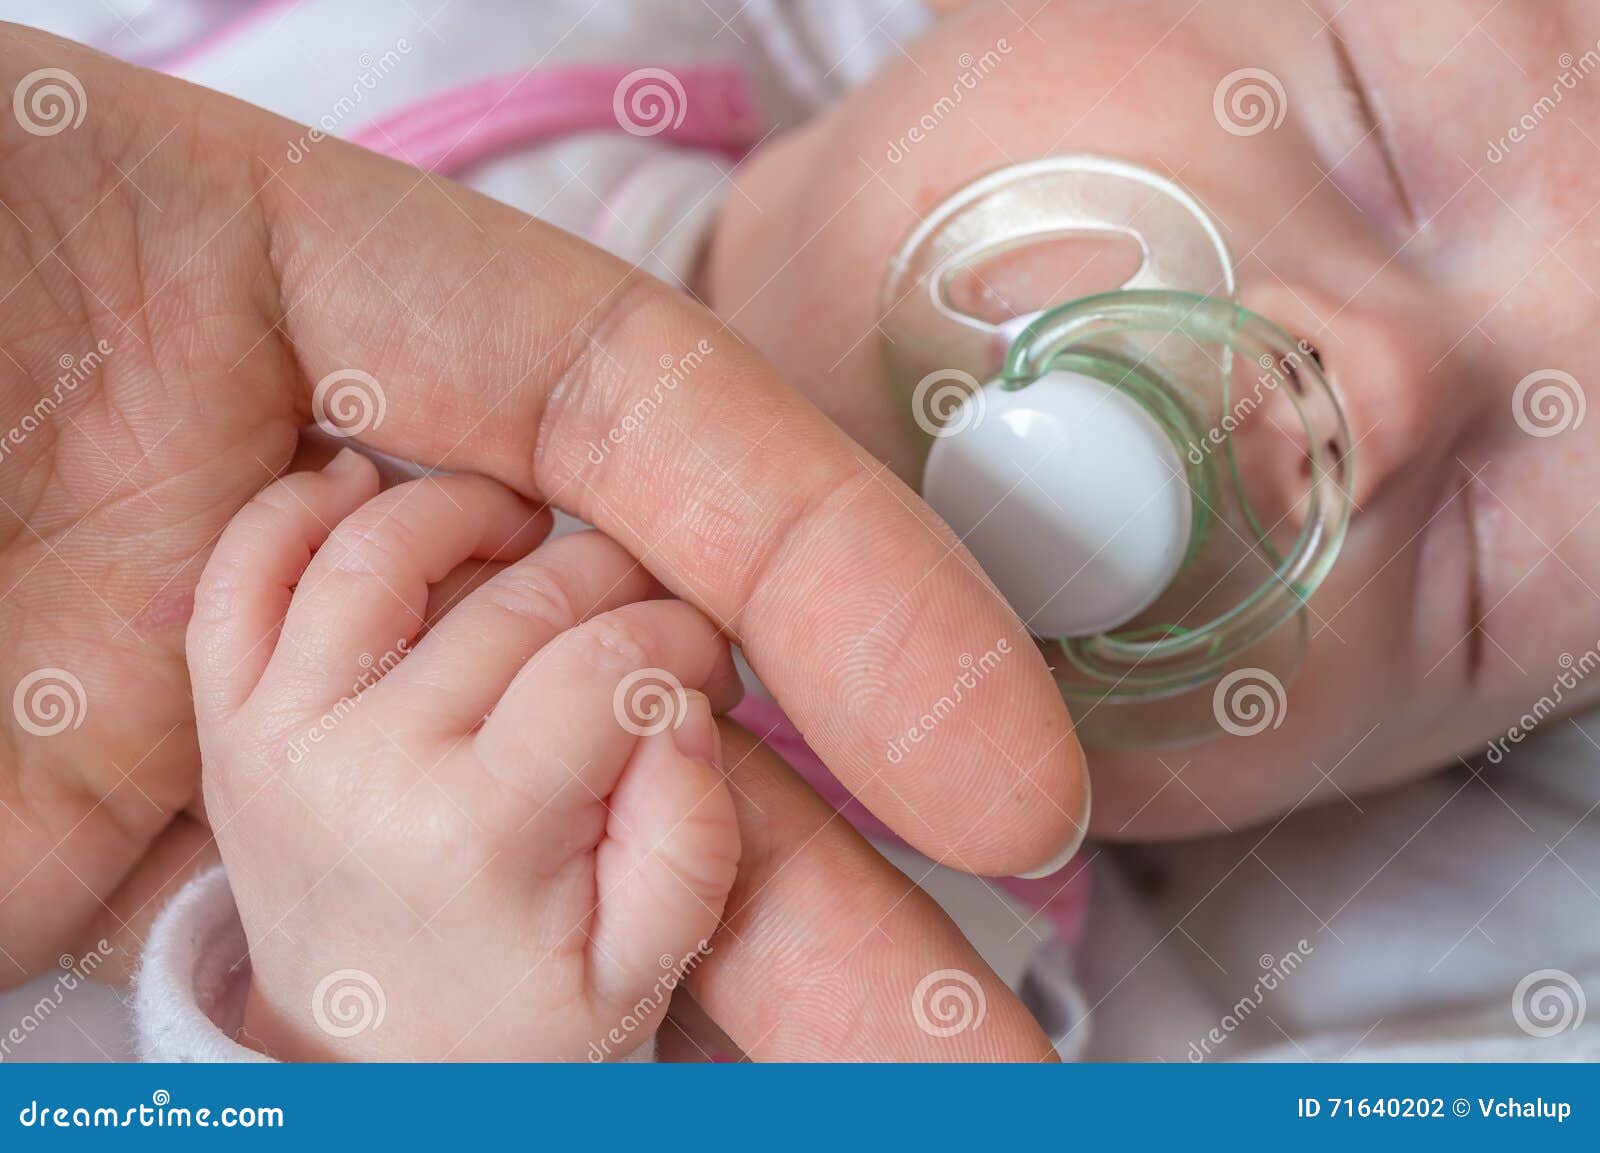 adoption baby concept. man is touching baby with hand